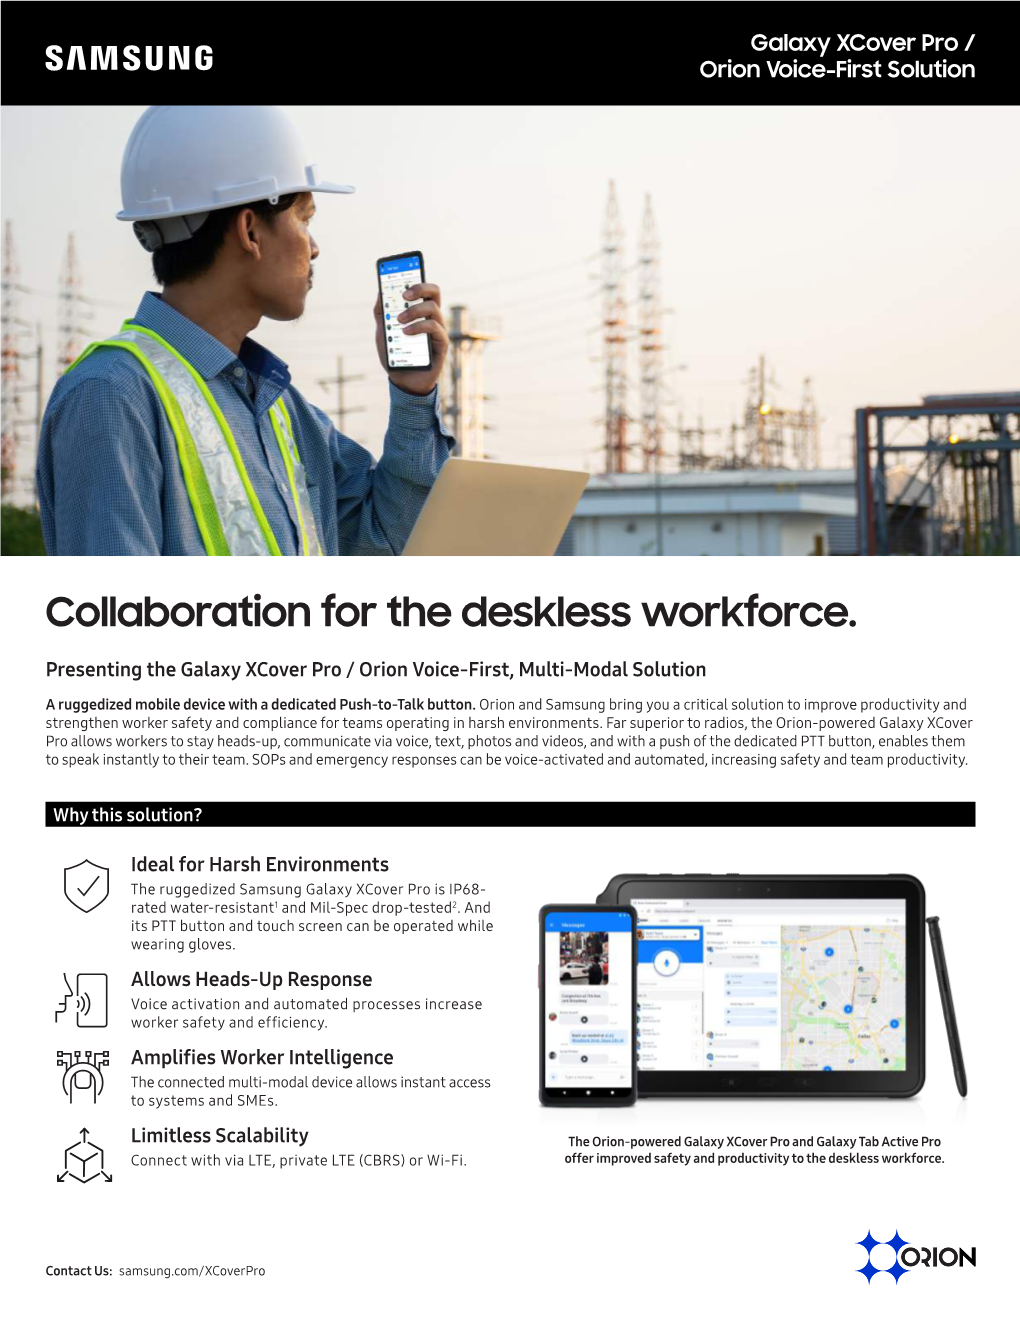 Collaboration for the Deskless Workforce